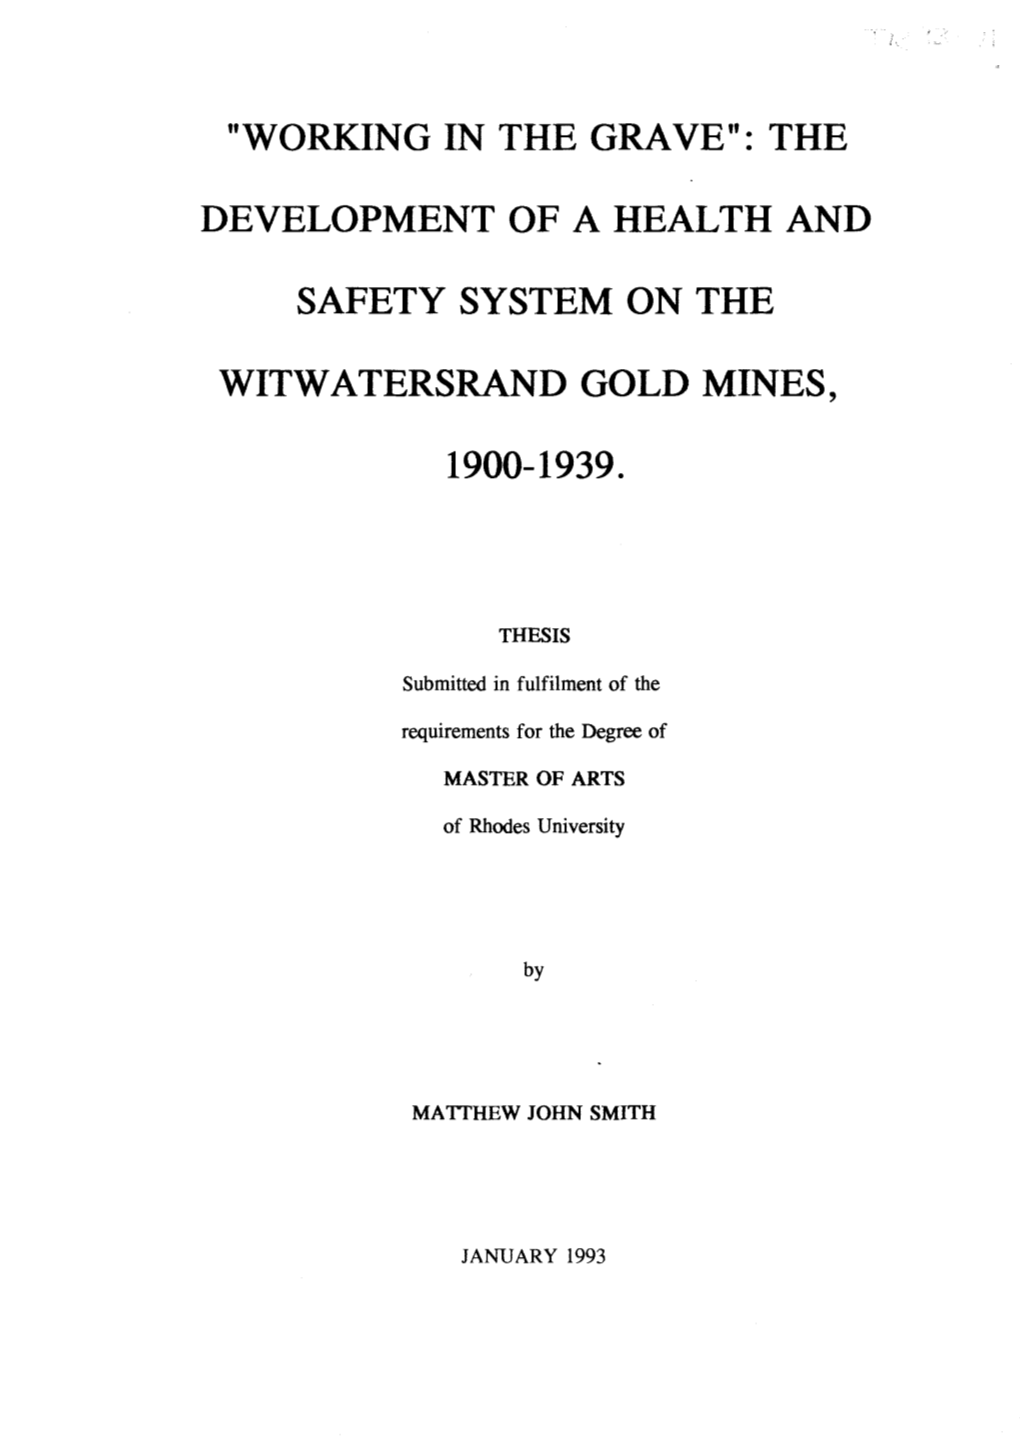 "Working in the Grave": the Development of a Health and Safety System on the Witwatersrand Gold Mines